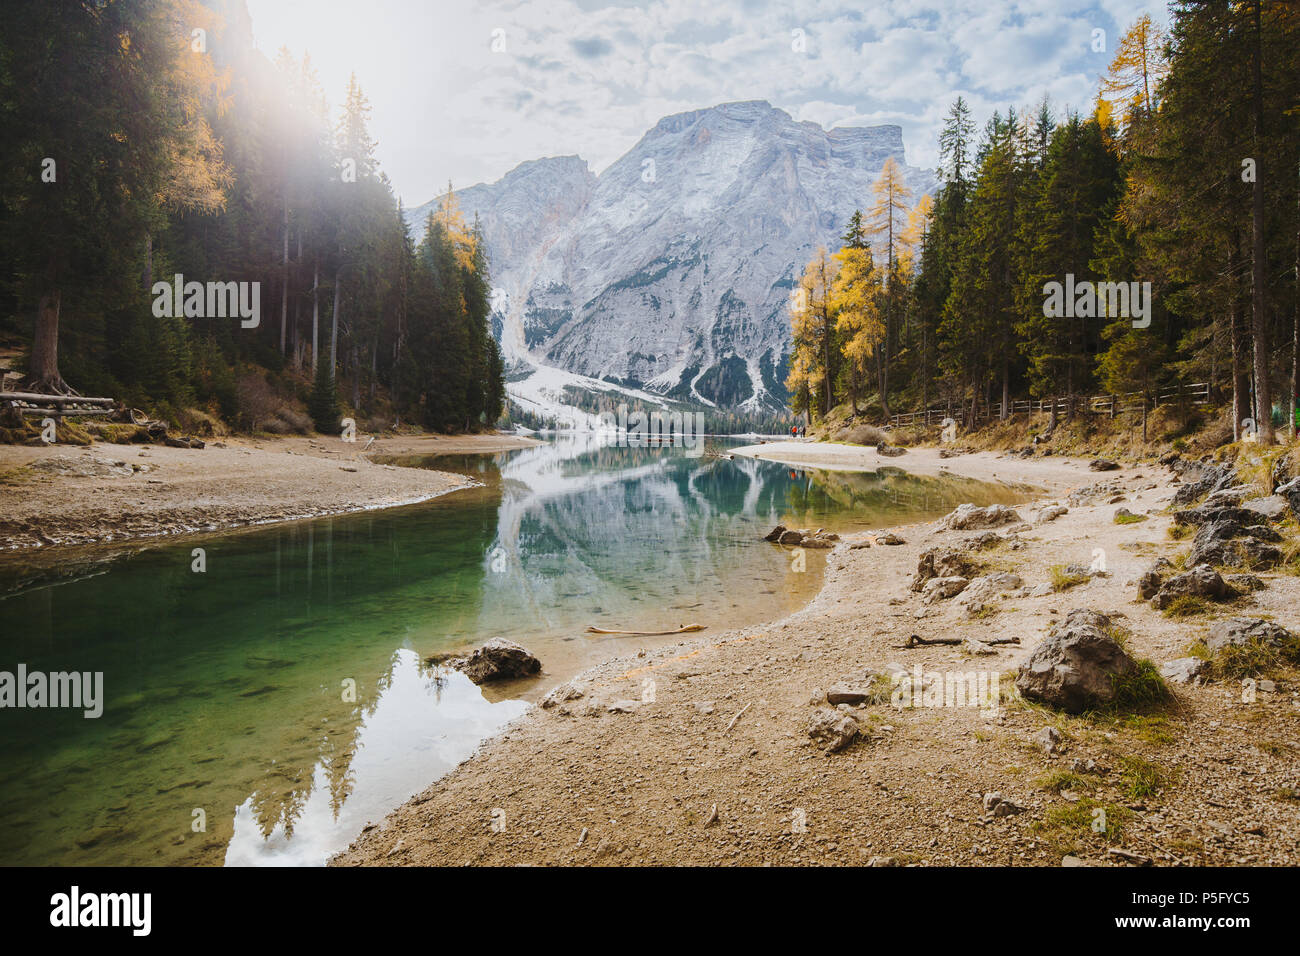 Scenic view of beautiful mountain scenery at famous Lago di Braies with Dolomites mountain peaks reflecting in calm water, South Tyrol, Italy Stock Photo